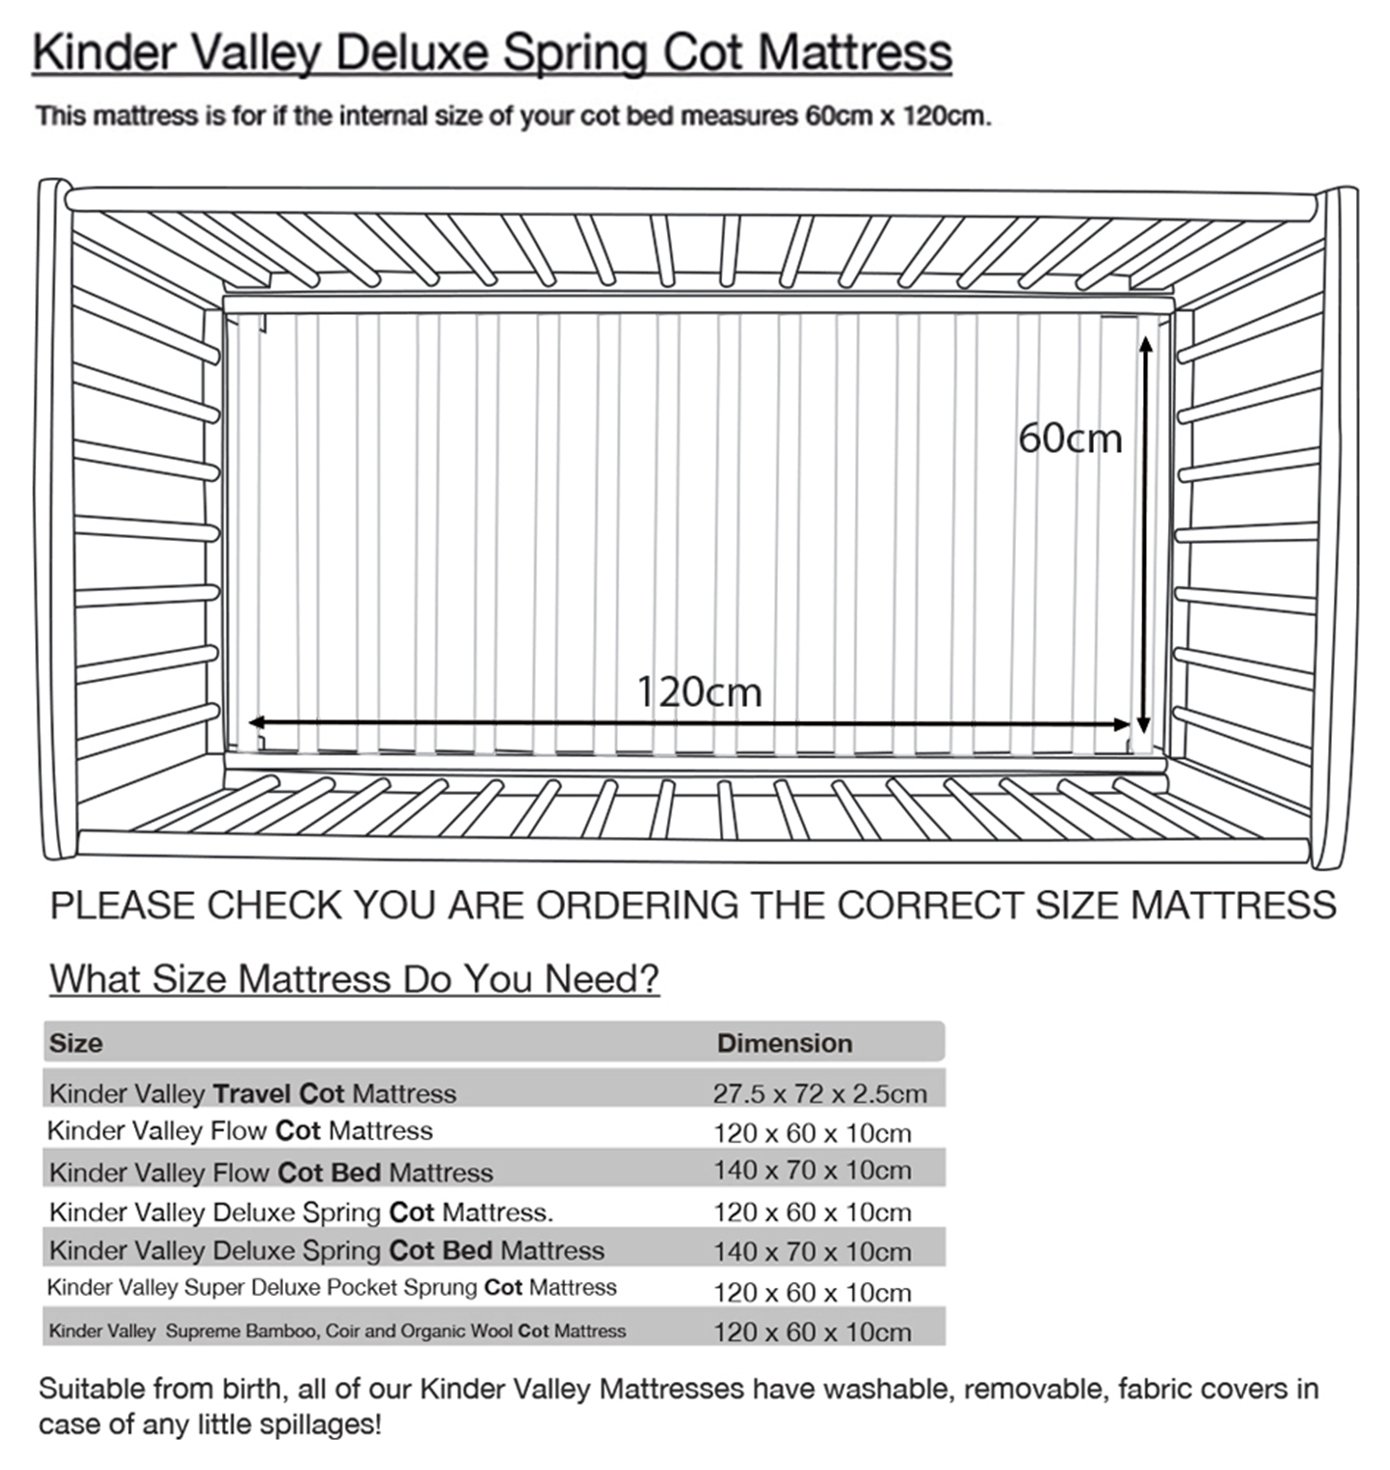 Kinder Valley 120 x 60cm Deluxe Spring Cot Mattress Review